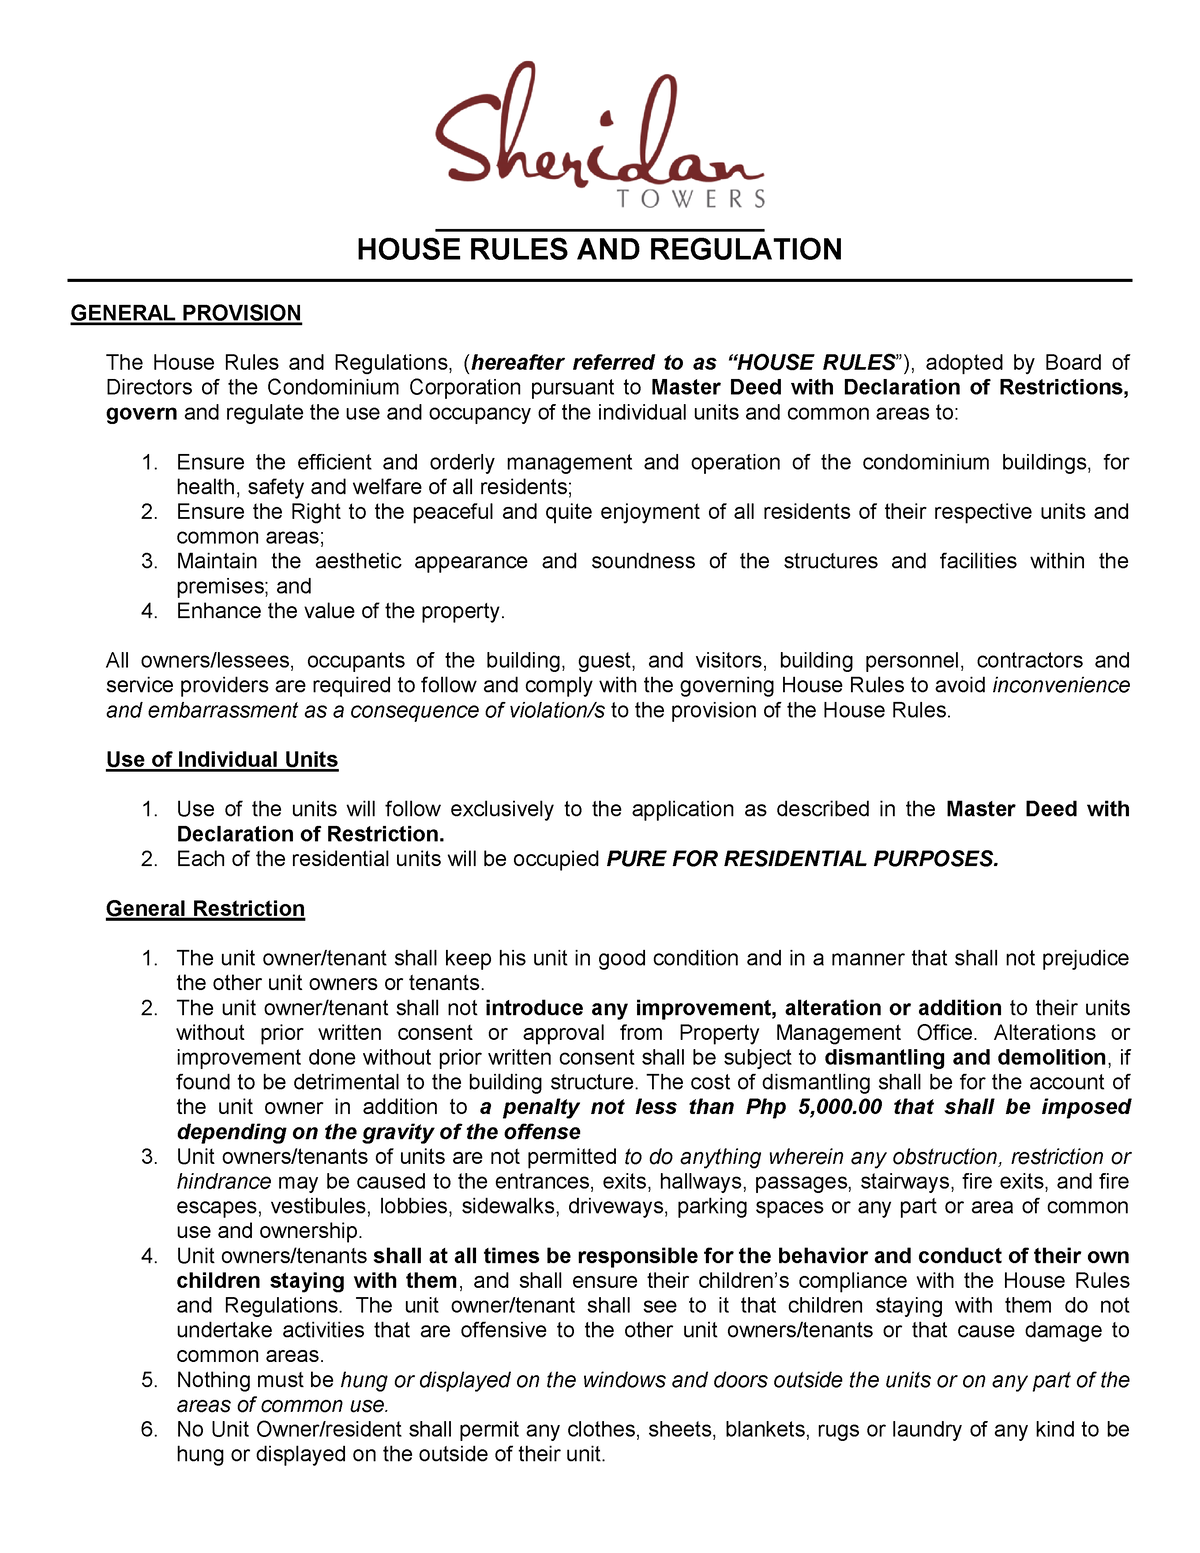 Samples SRT PAGE House Rules FOR Tenant HOUSE RULES AND REGULATION